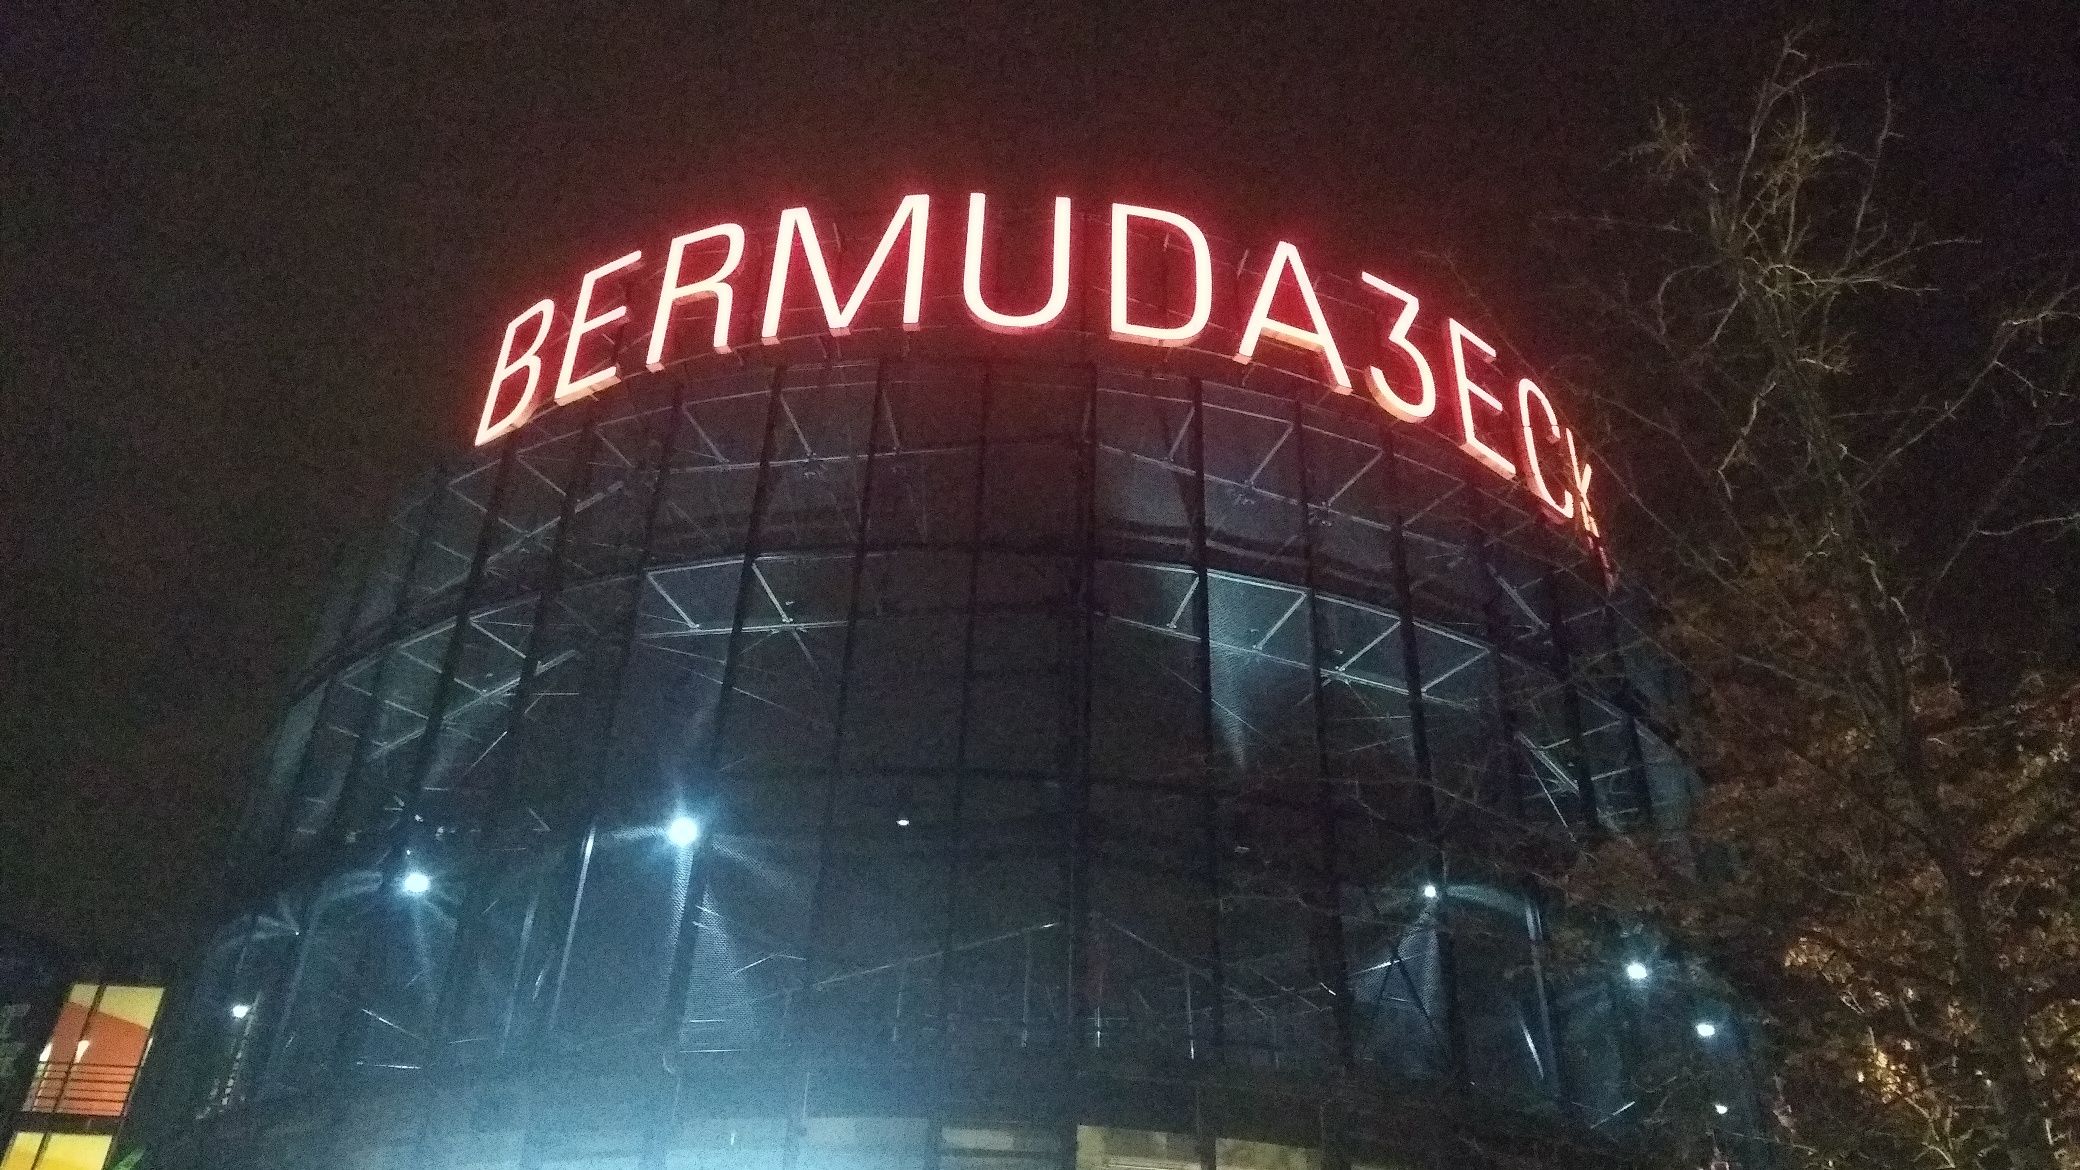 The neon sign showing the name of the area